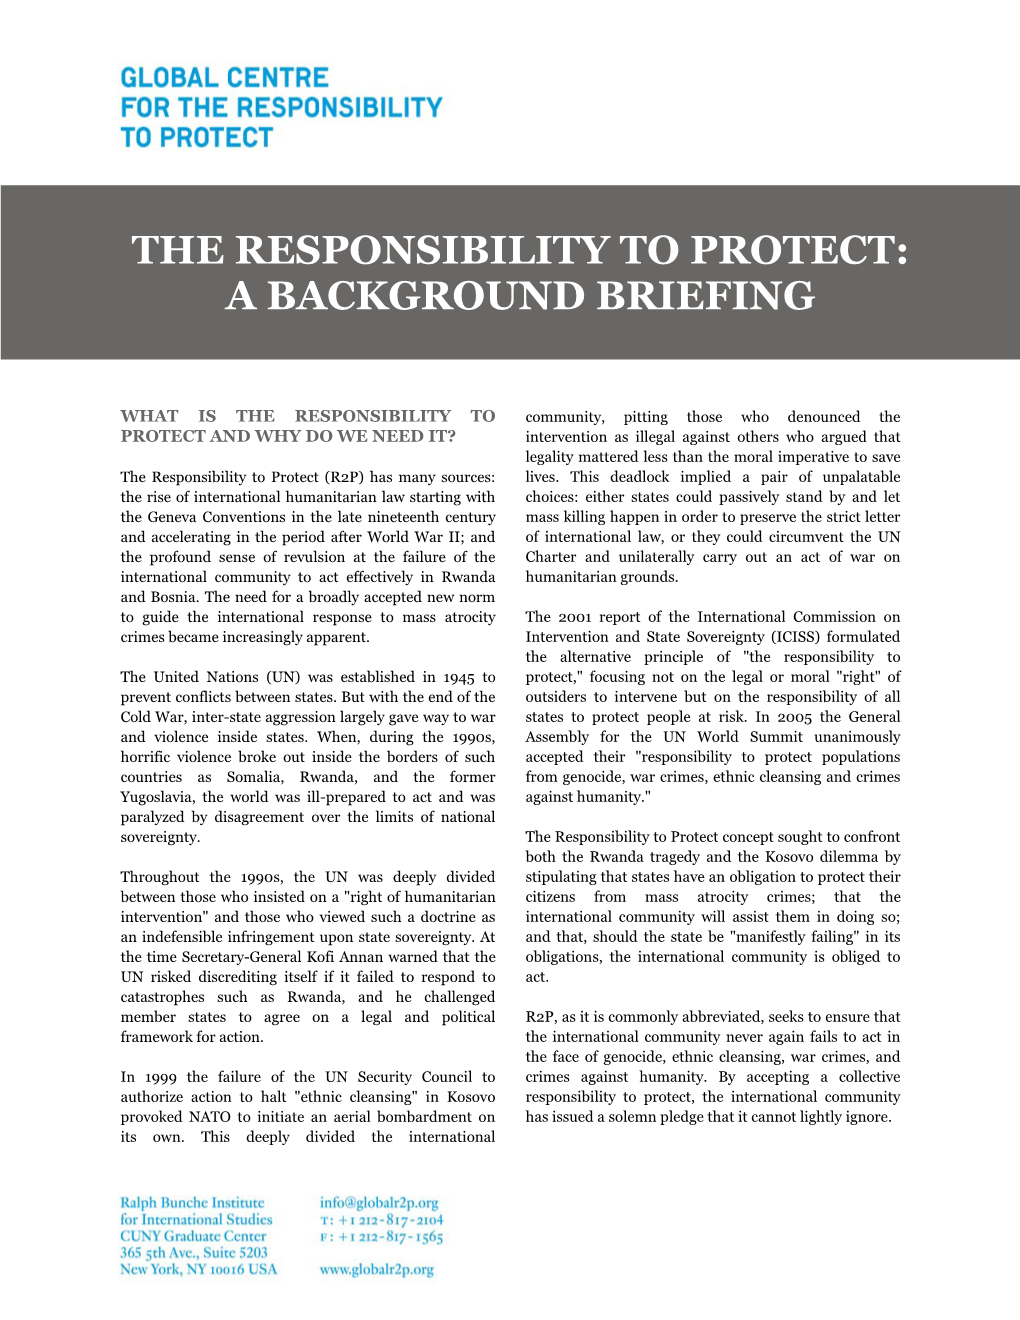 The Responsibility to Protect: a Background Briefing